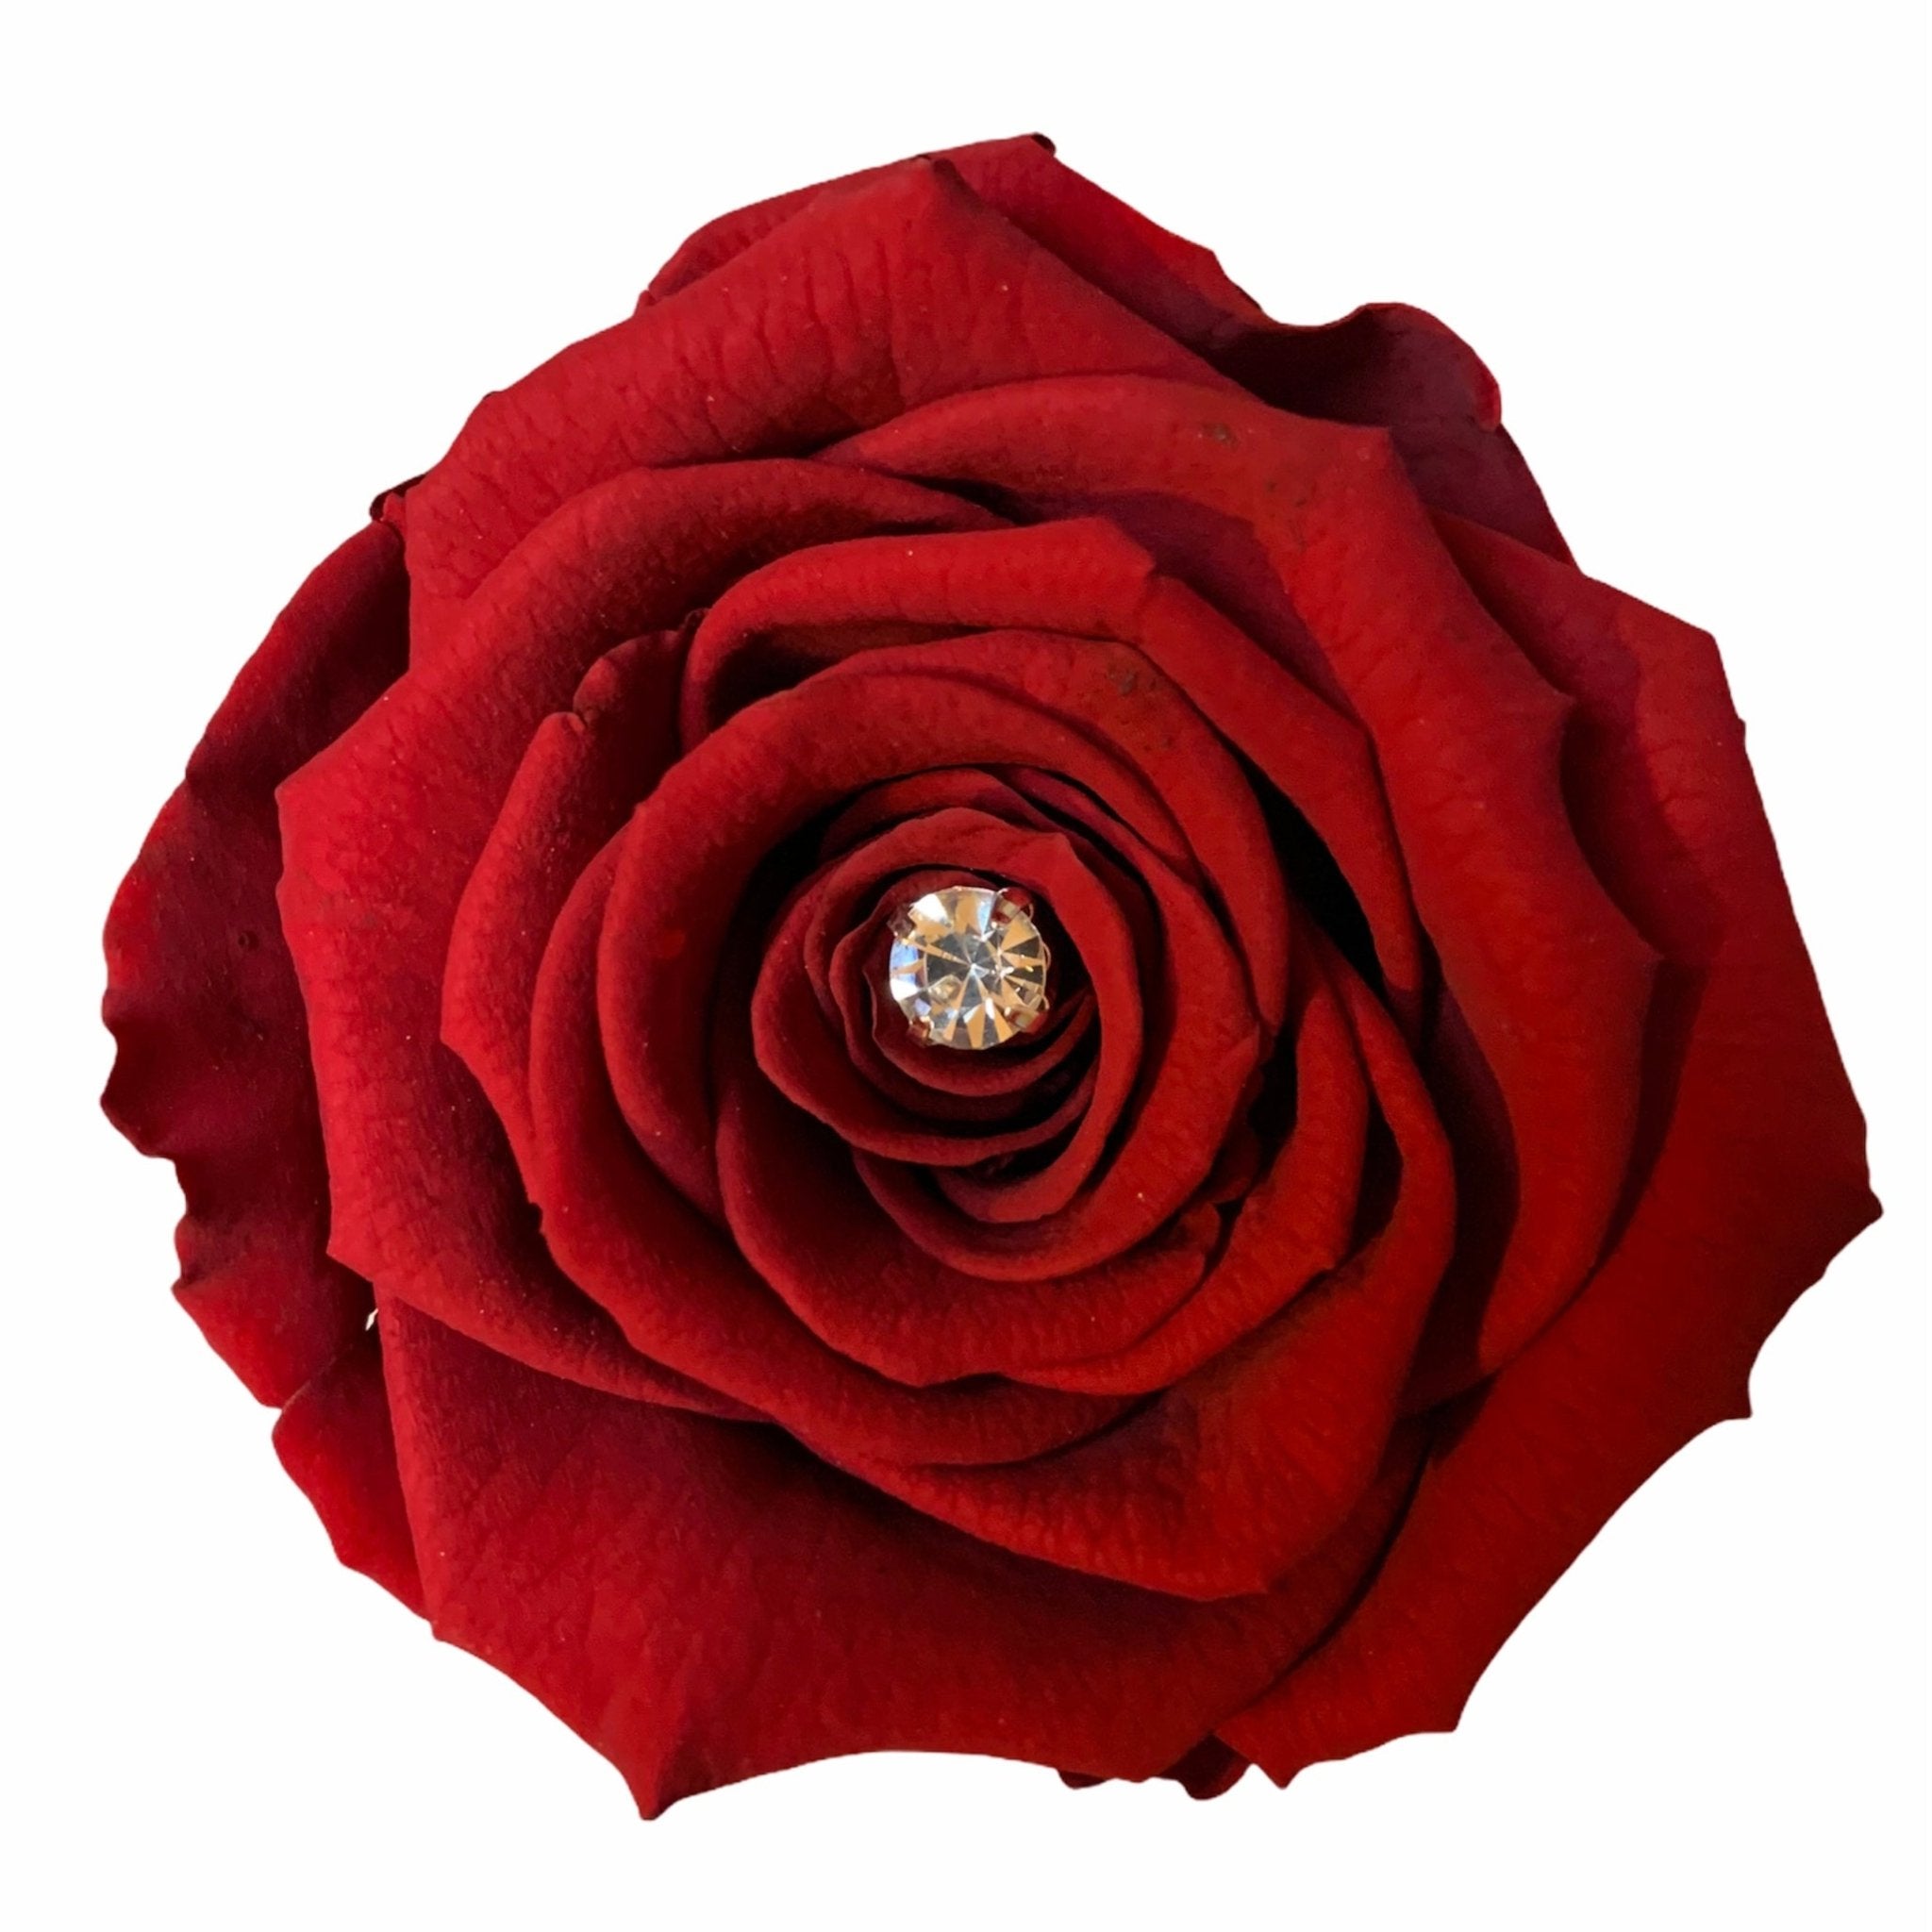 What Makes Red Roses So Romantic? - Jednay Roses